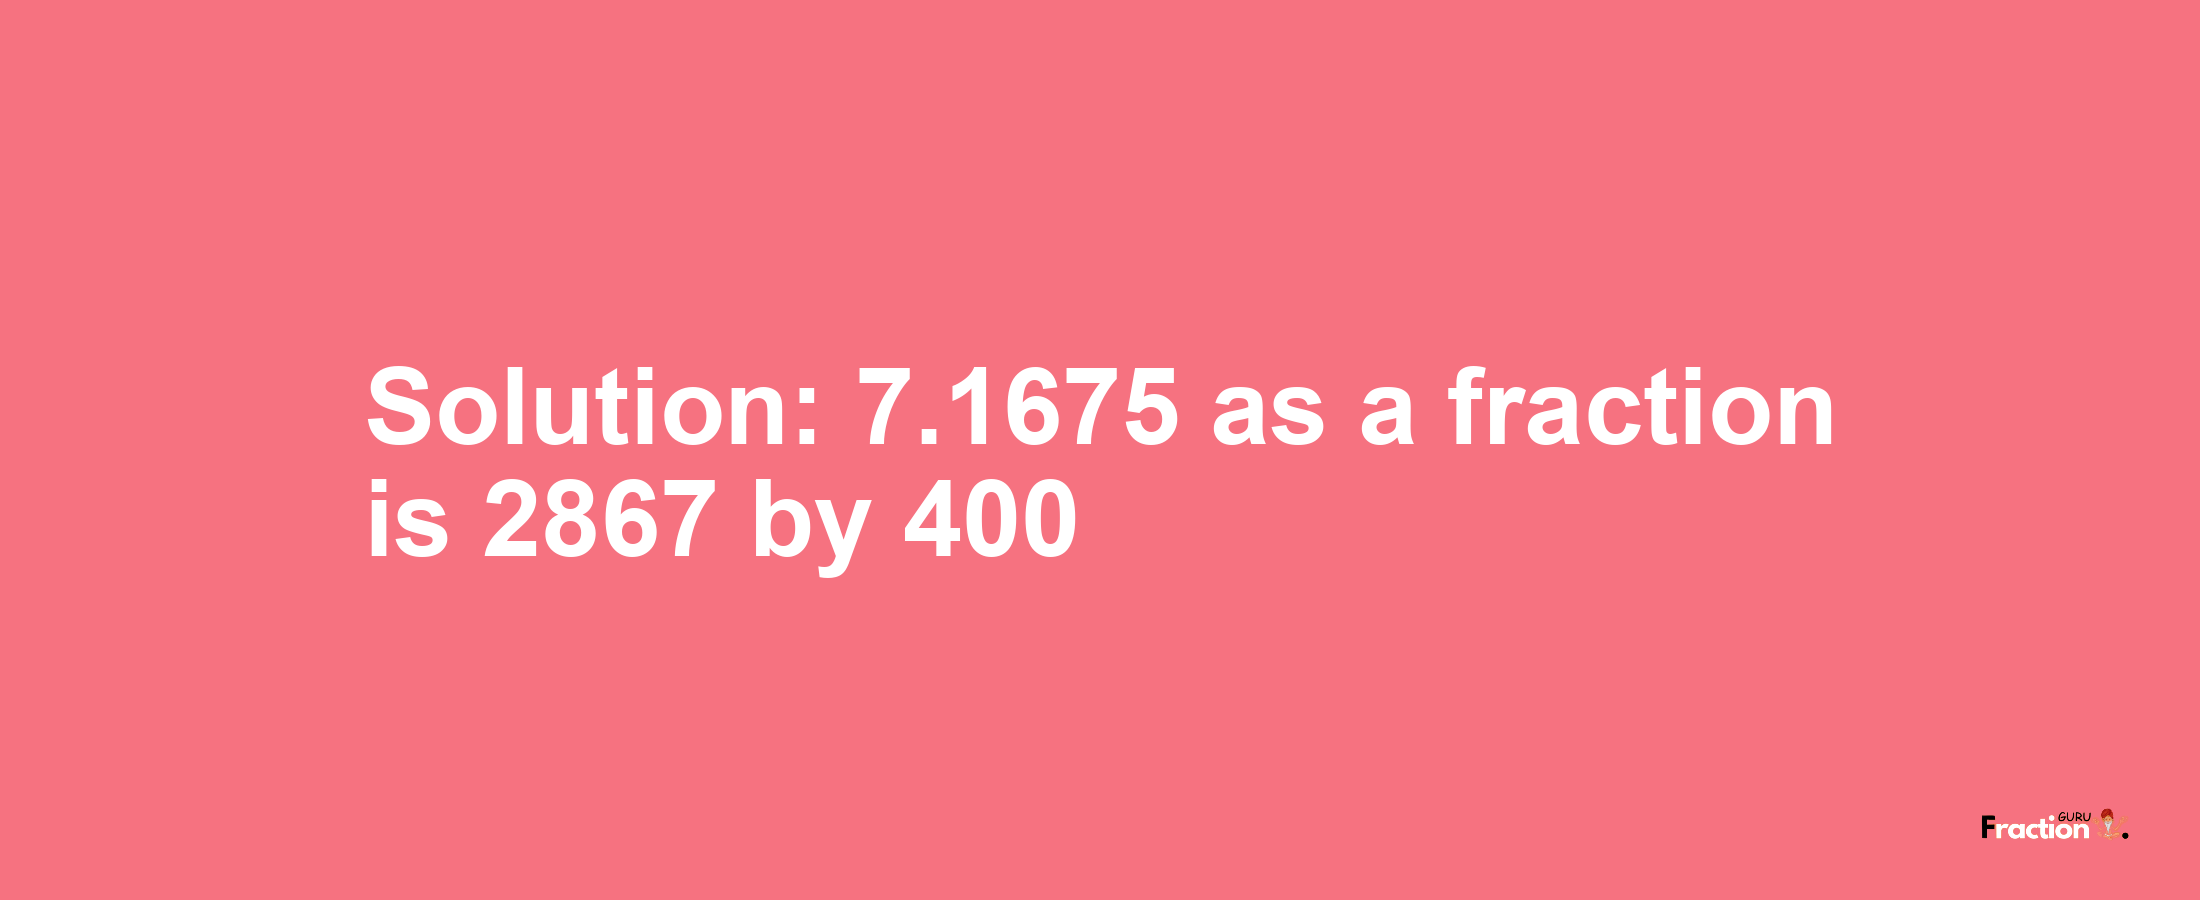 Solution:7.1675 as a fraction is 2867/400